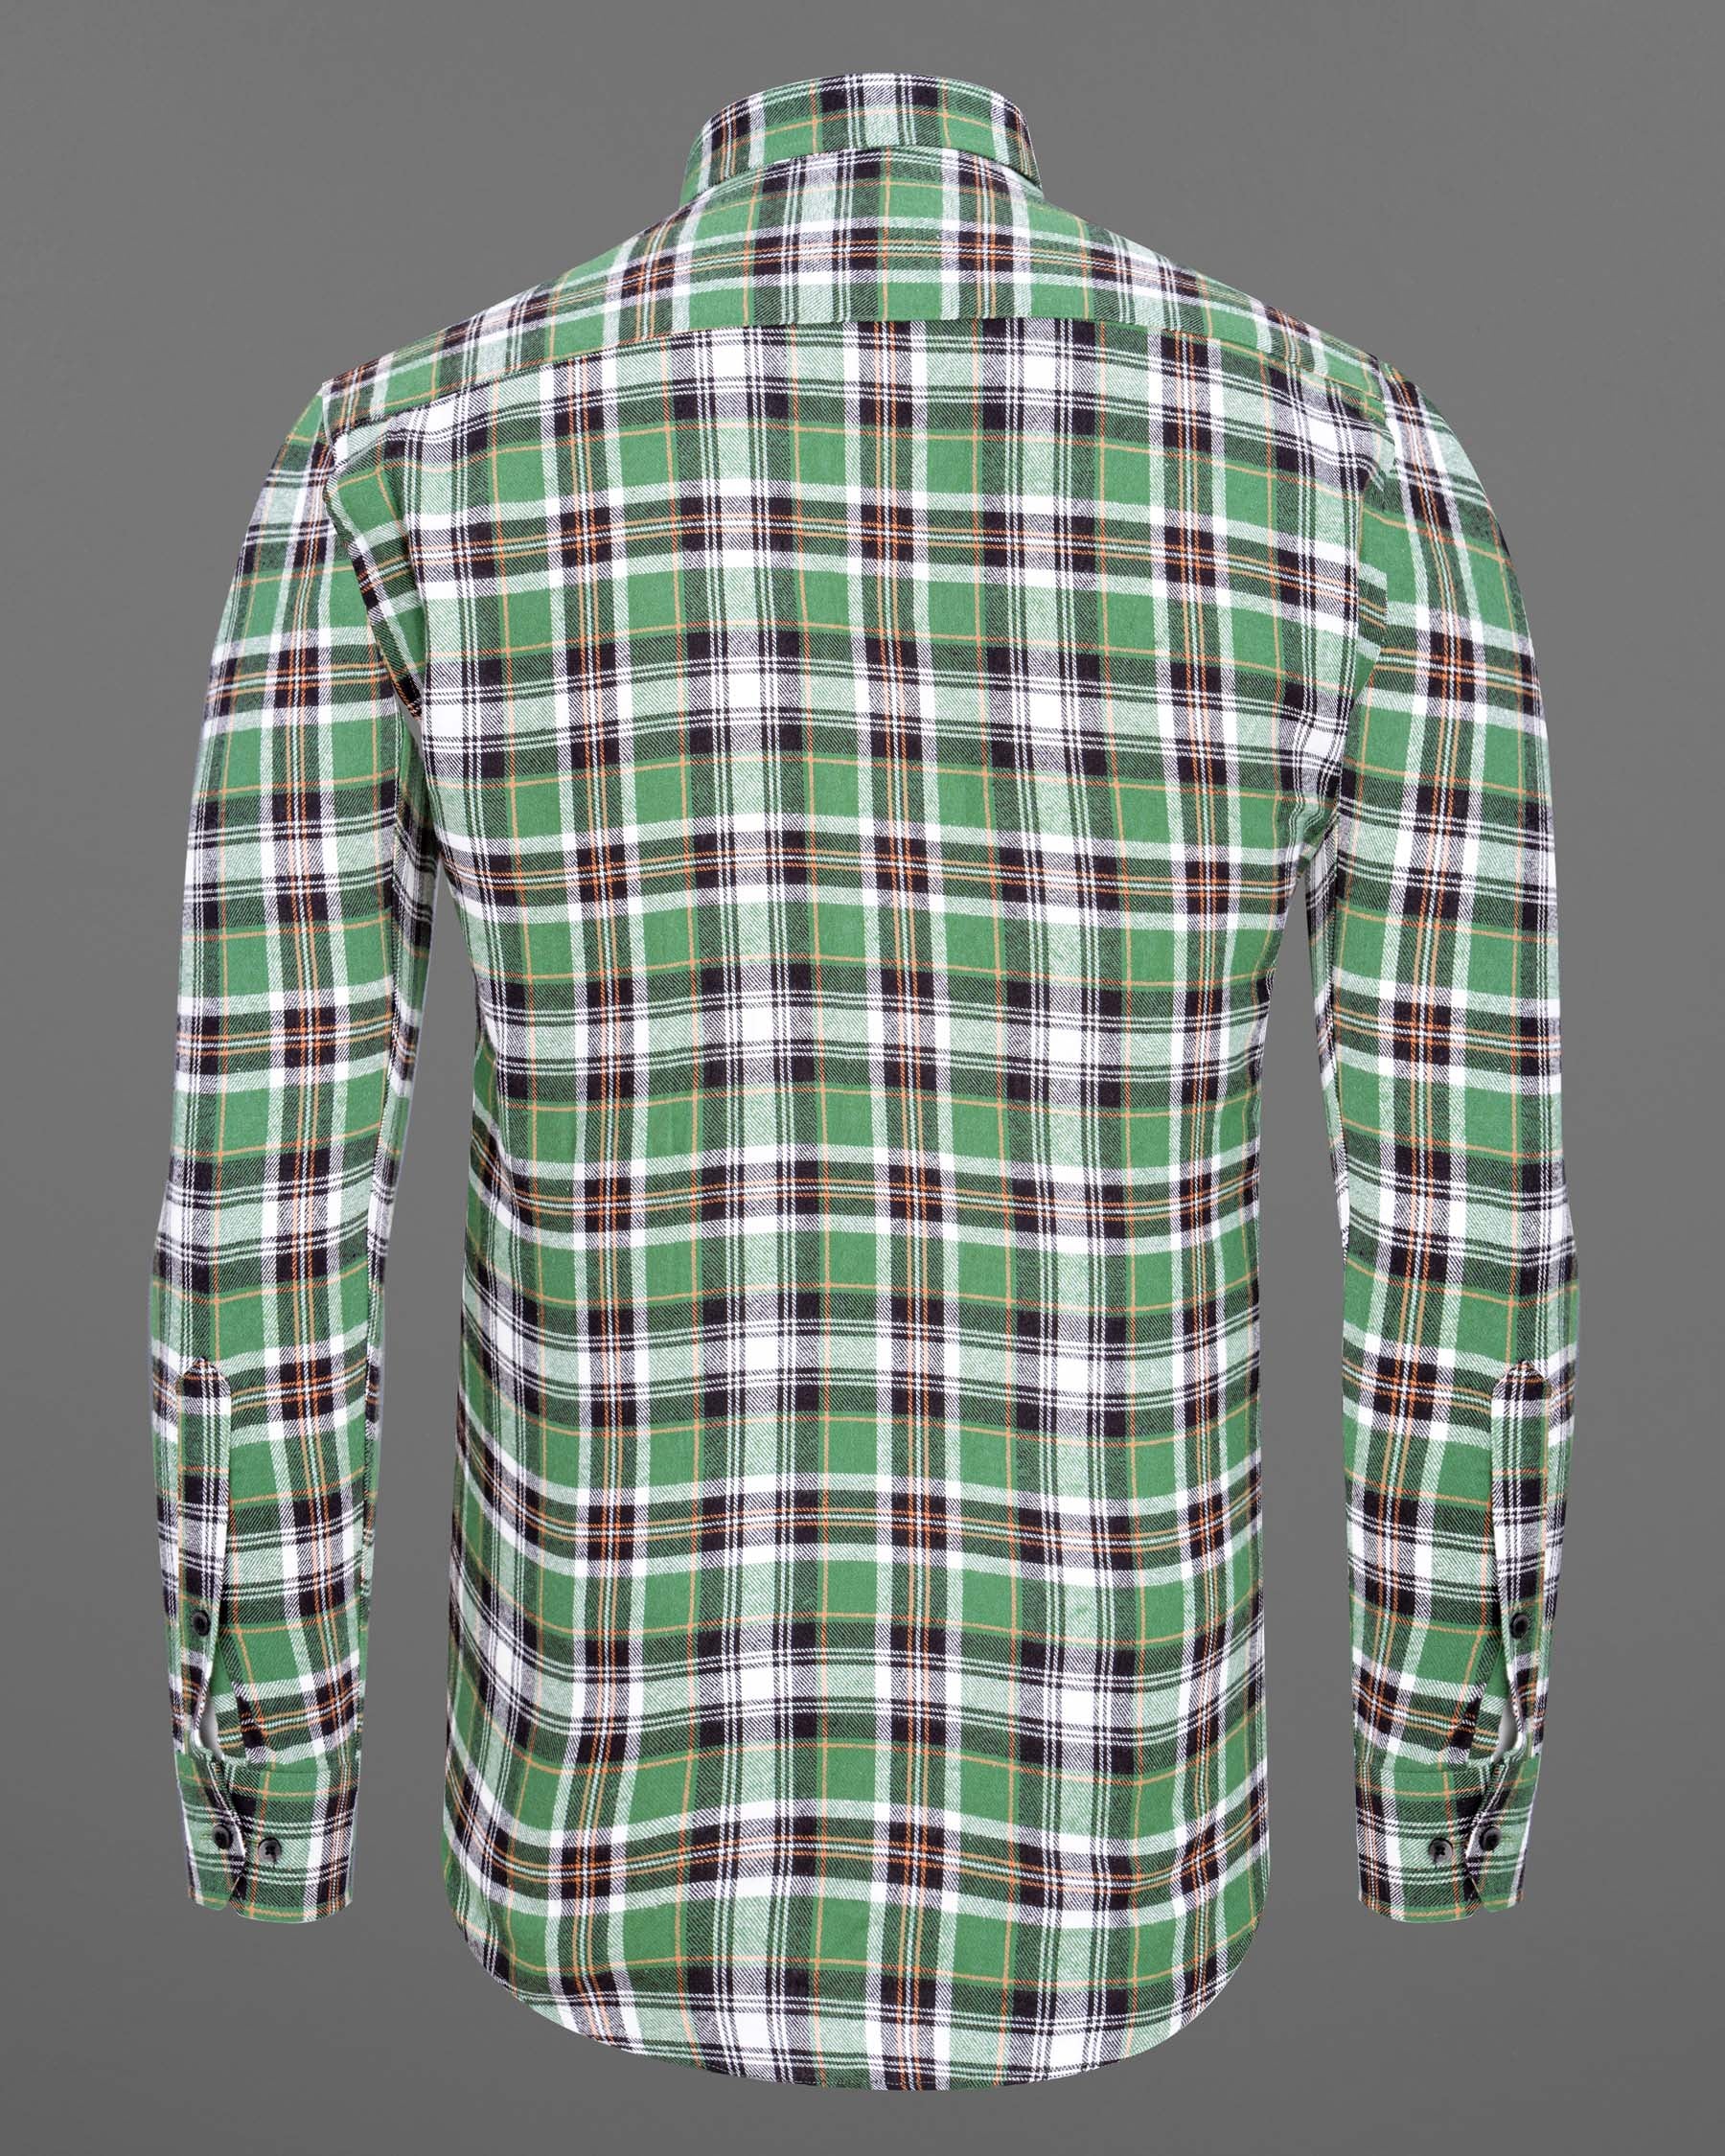 Amulet Green and off white Plaid Flannel Shirt 6900-BD-BLK-38,6900-BD-BLK-38,6900-BD-BLK-39,6900-BD-BLK-39,6900-BD-BLK-40,6900-BD-BLK-40,6900-BD-BLK-42,6900-BD-BLK-42,6900-BD-BLK-44,6900-BD-BLK-44,6900-BD-BLK-46,6900-BD-BLK-46,6900-BD-BLK-48,6900-BD-BLK-48,6900-BD-BLK-50,6900-BD-BLK-50,6900-BD-BLK-52,6900-BD-BLK-52